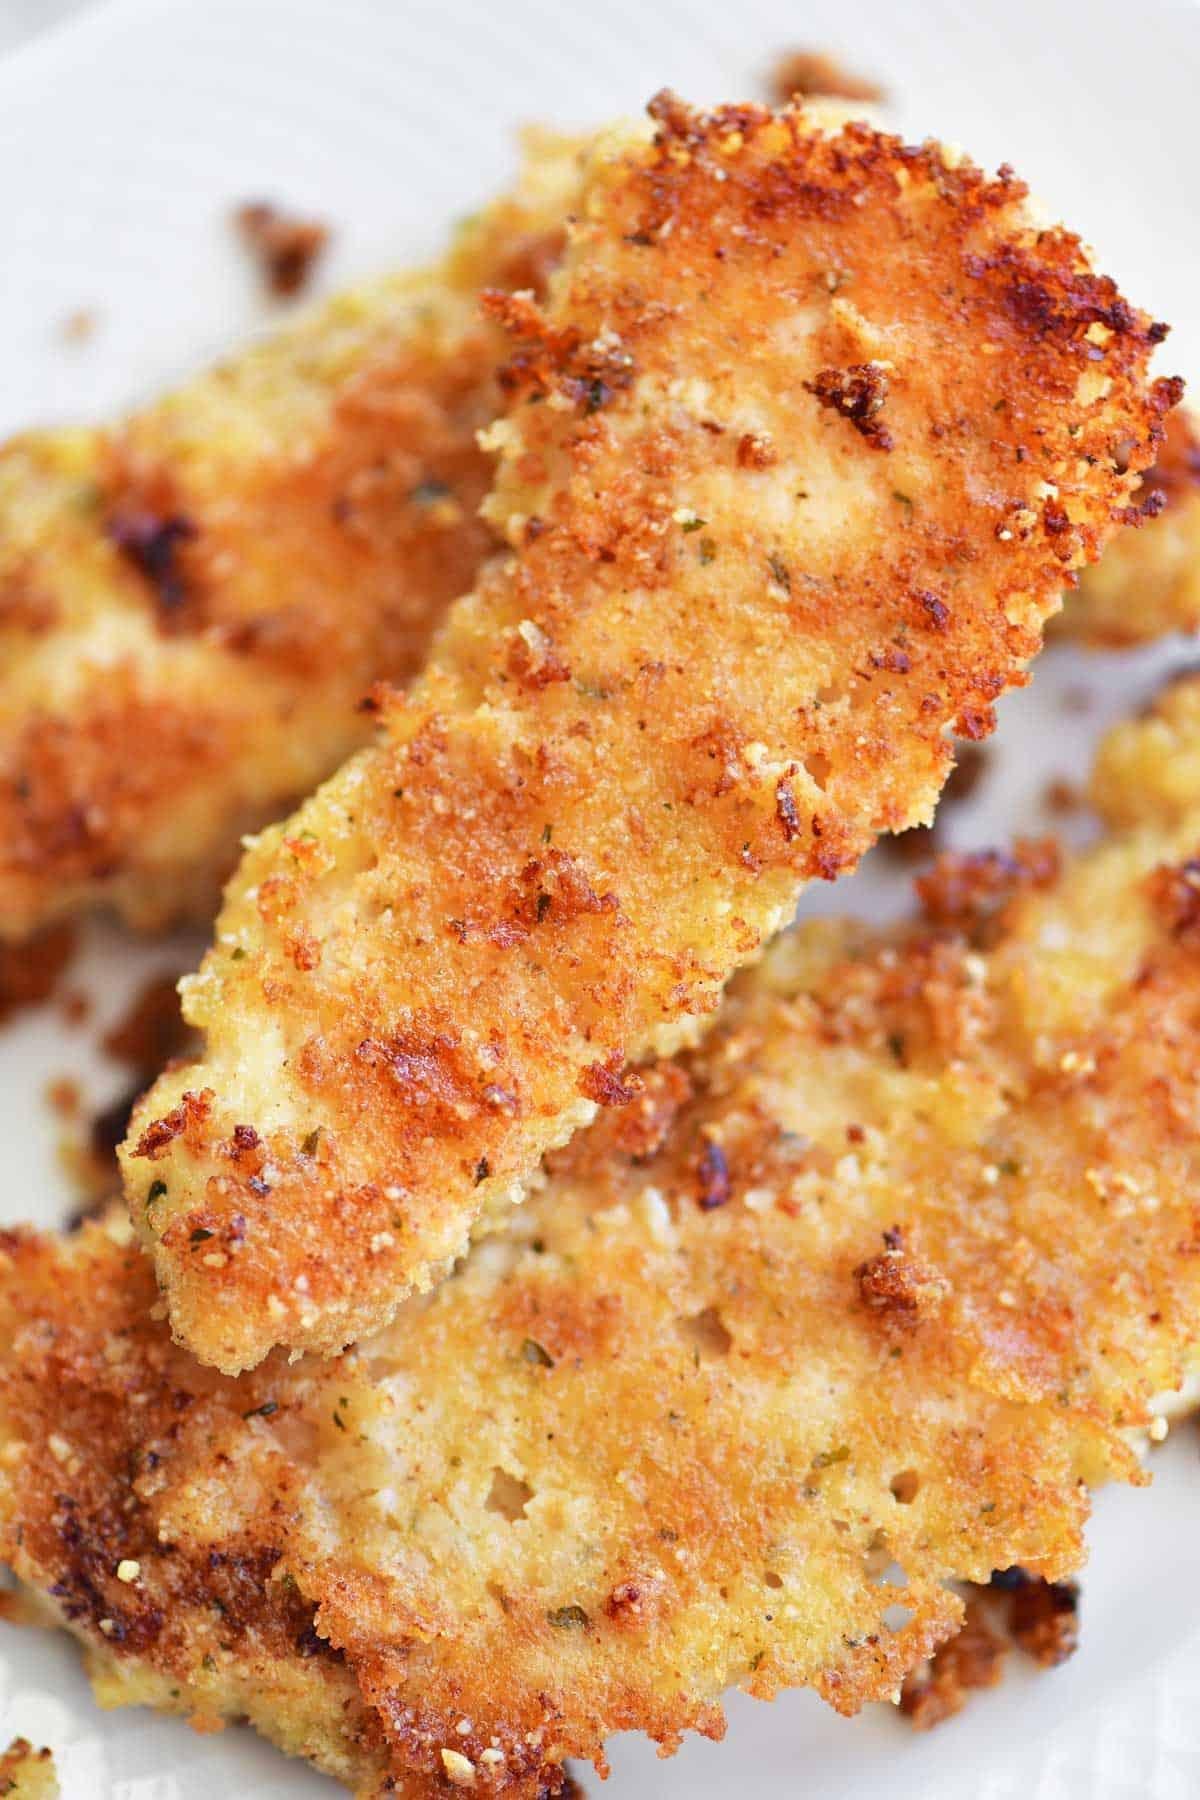 Crispy Parmesan Chicken Tenders - A Delicious Twist on a Classic Comfort Food